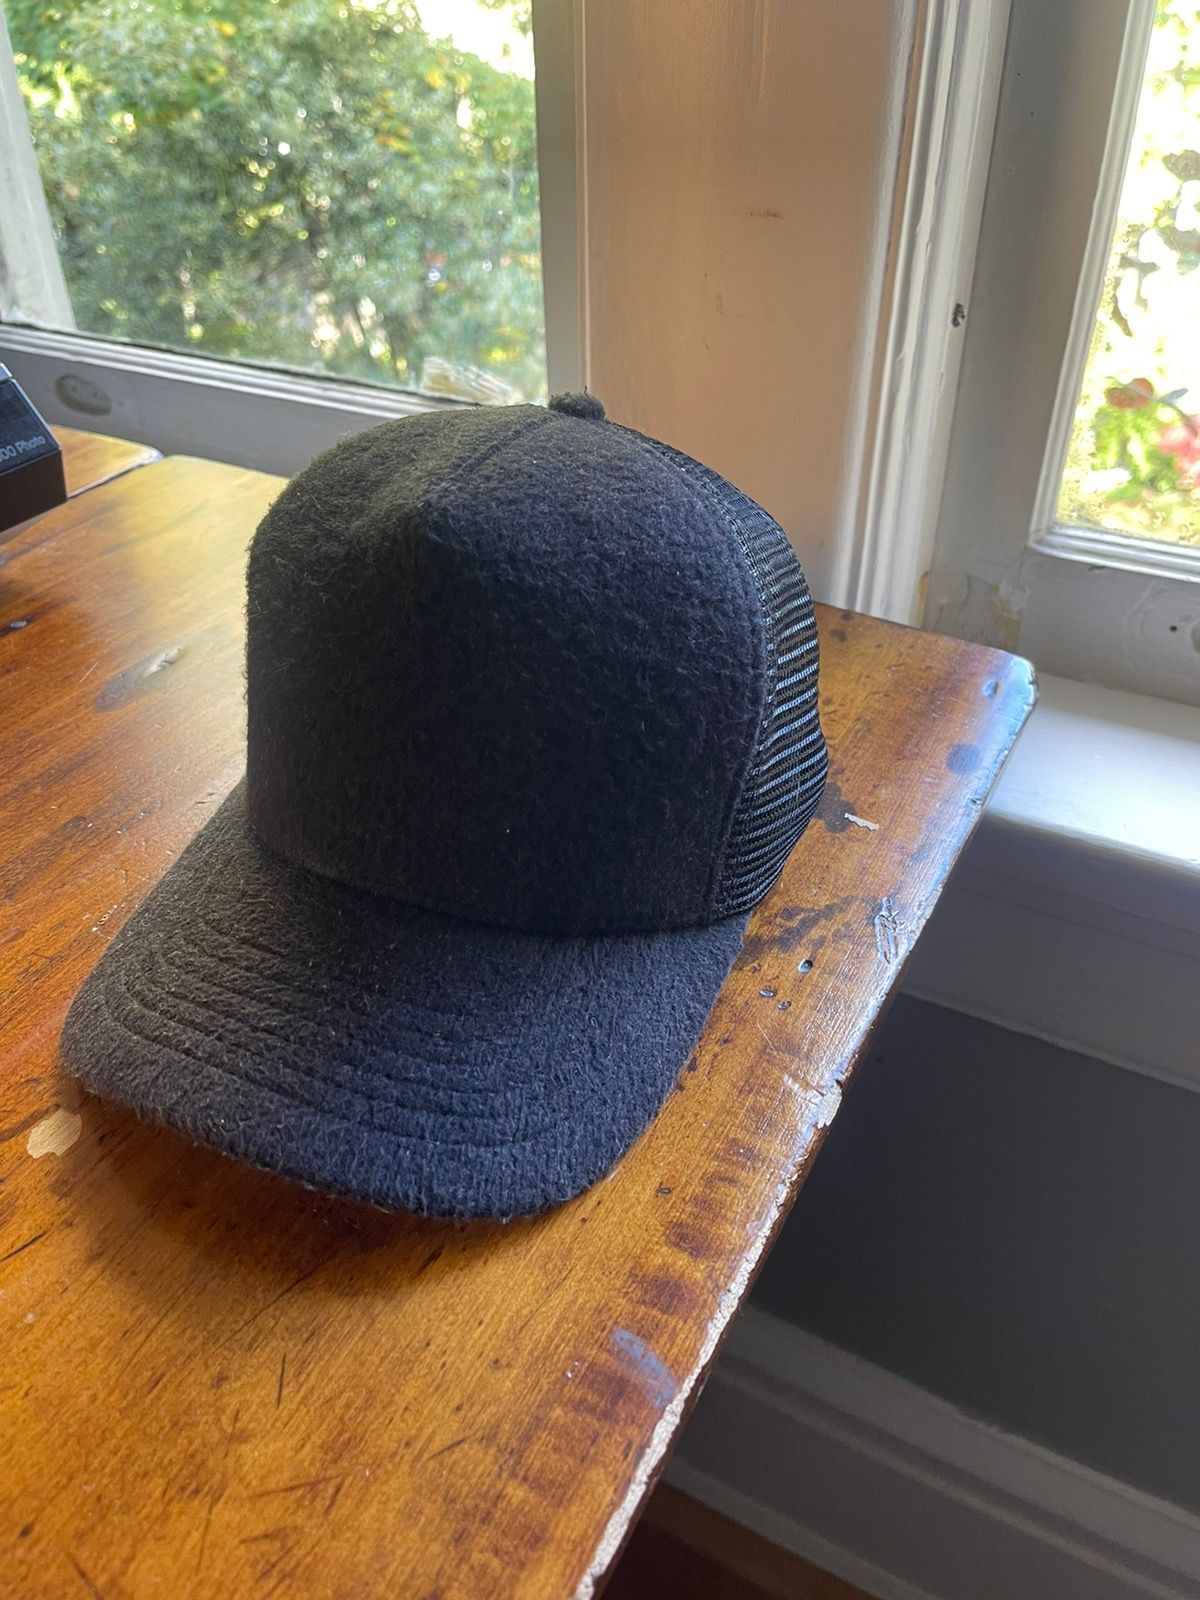 James Perse James Perse Wool Trucker Hat | Grailed